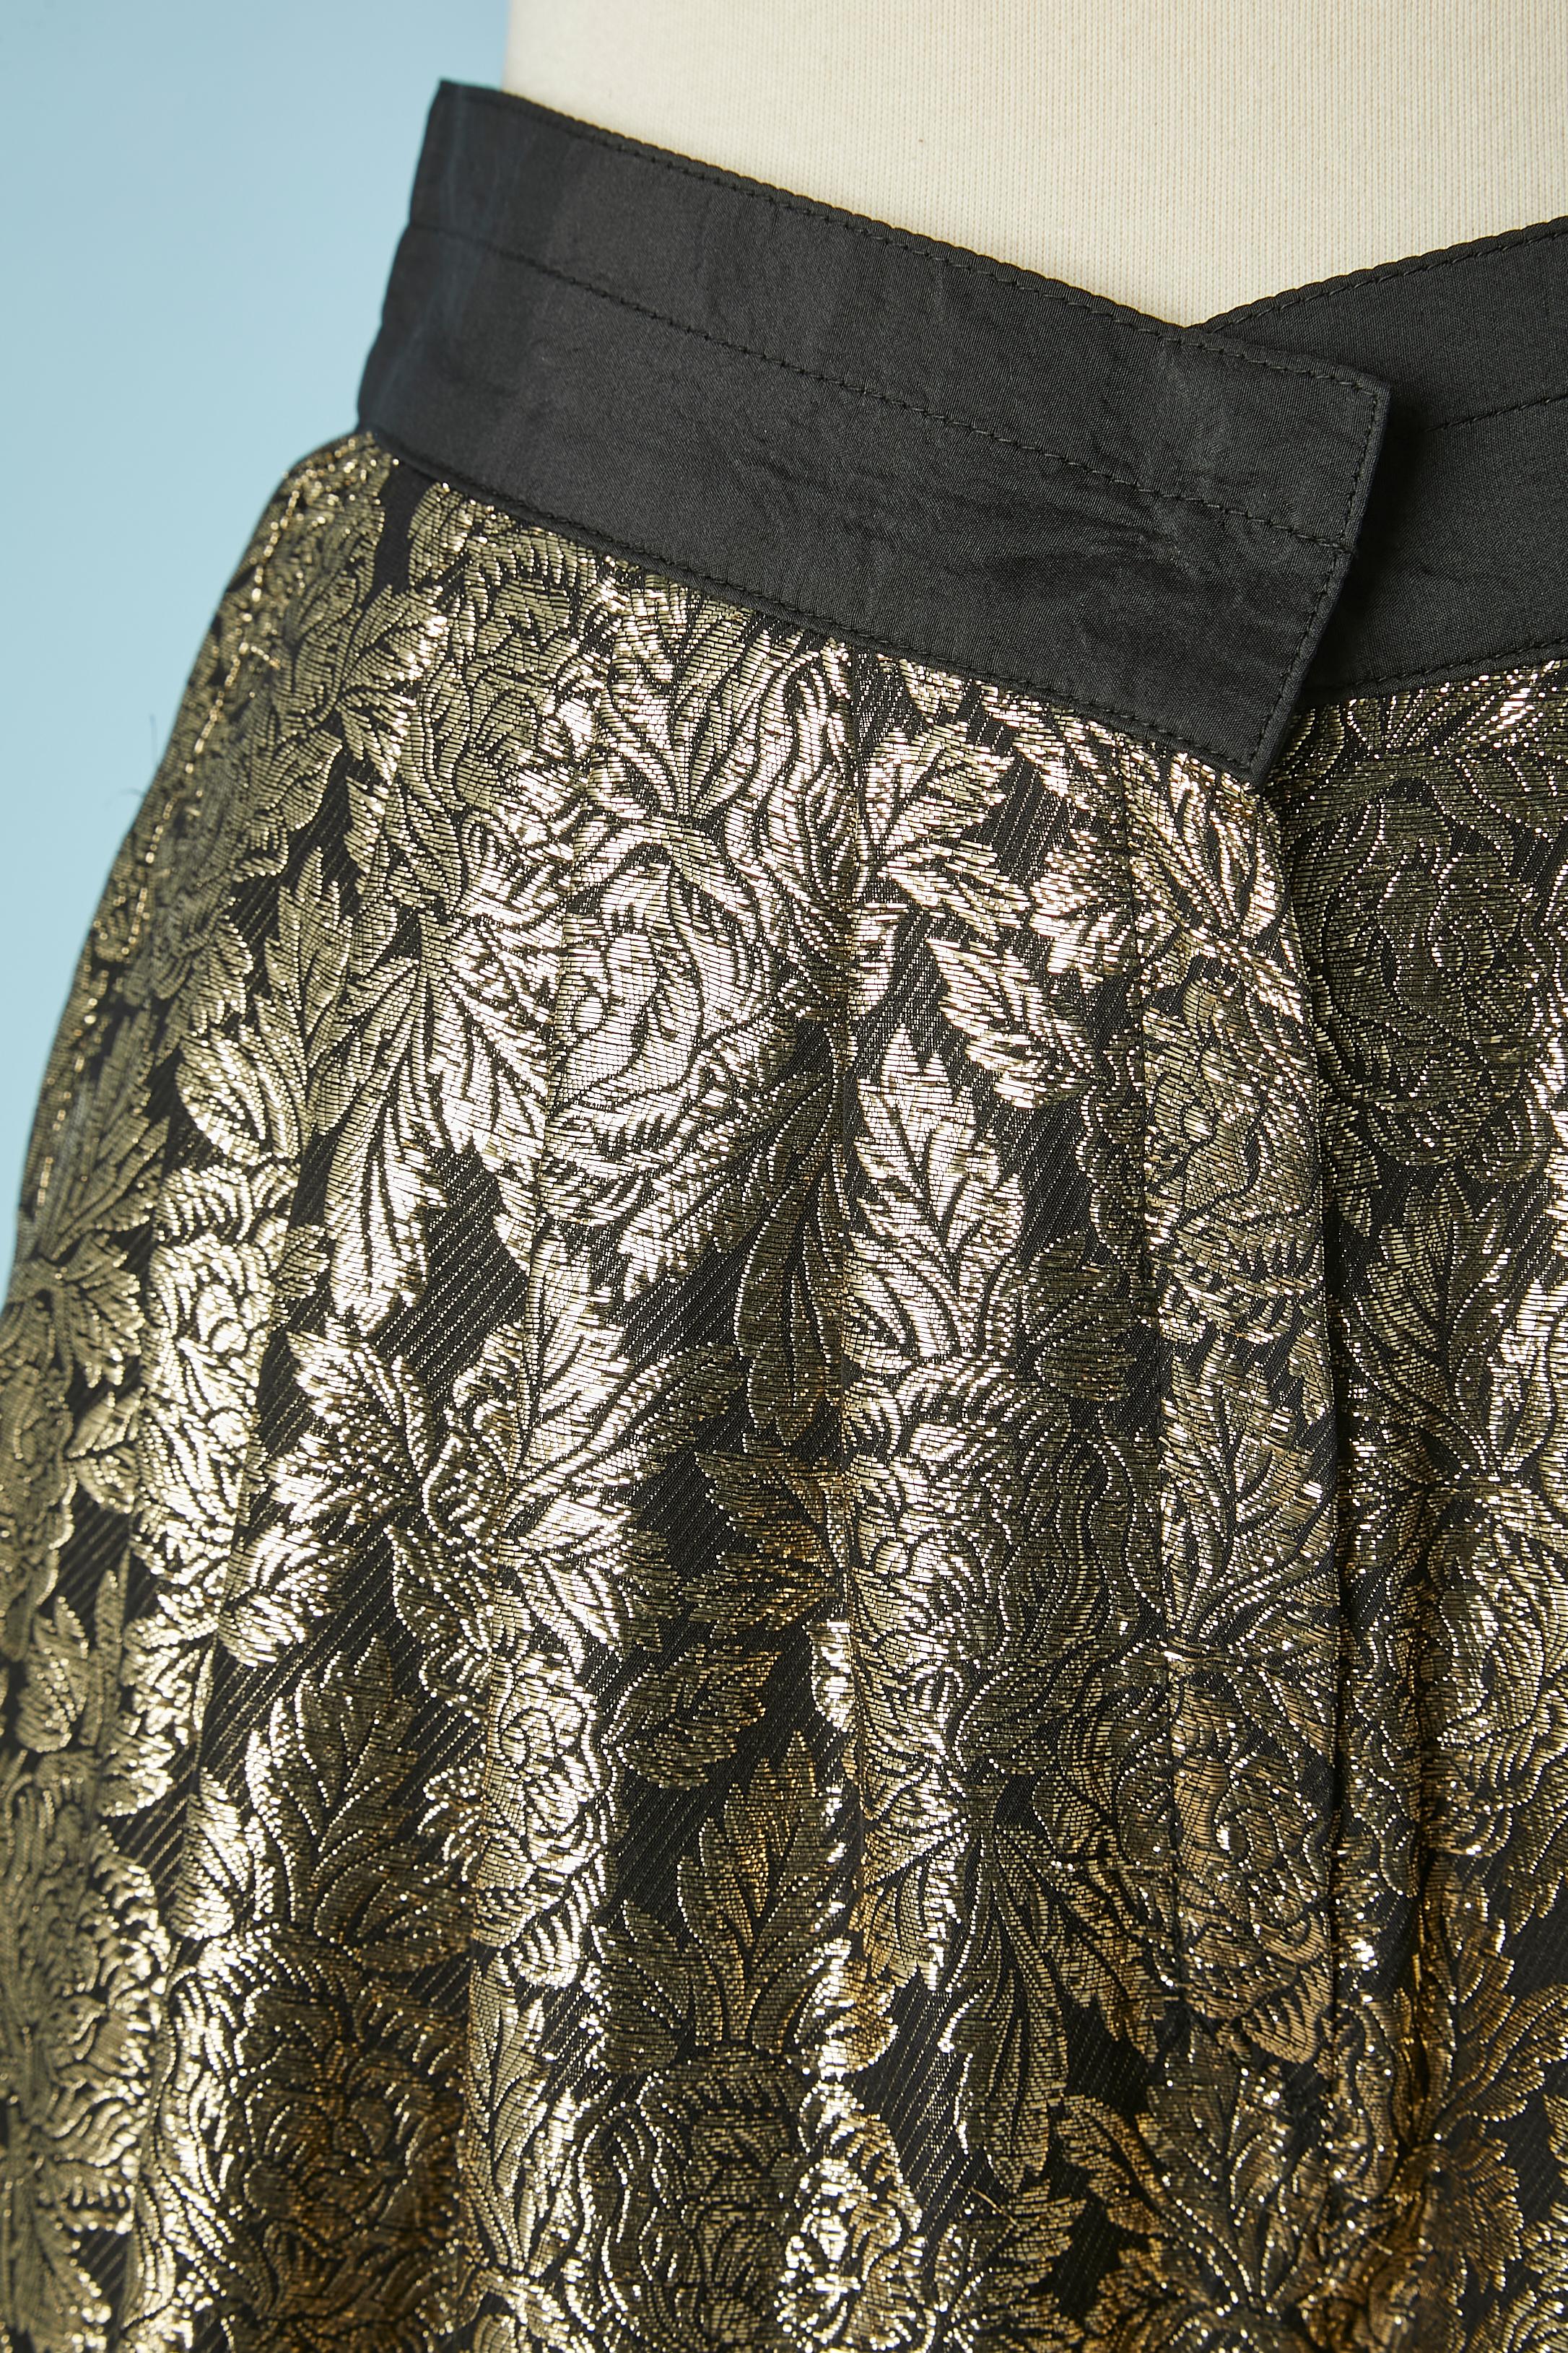 Gold and black lurex brocade trousers. Fabric composition: 80% silk, 20% polyester. Black silk waist band. Pocket on both side. Button, buttonhole and hook&eye closure in the top middle front. 
NEW WITH TAG
SIZE 42 (It) 38 (Fr) M ( but small waist) 
